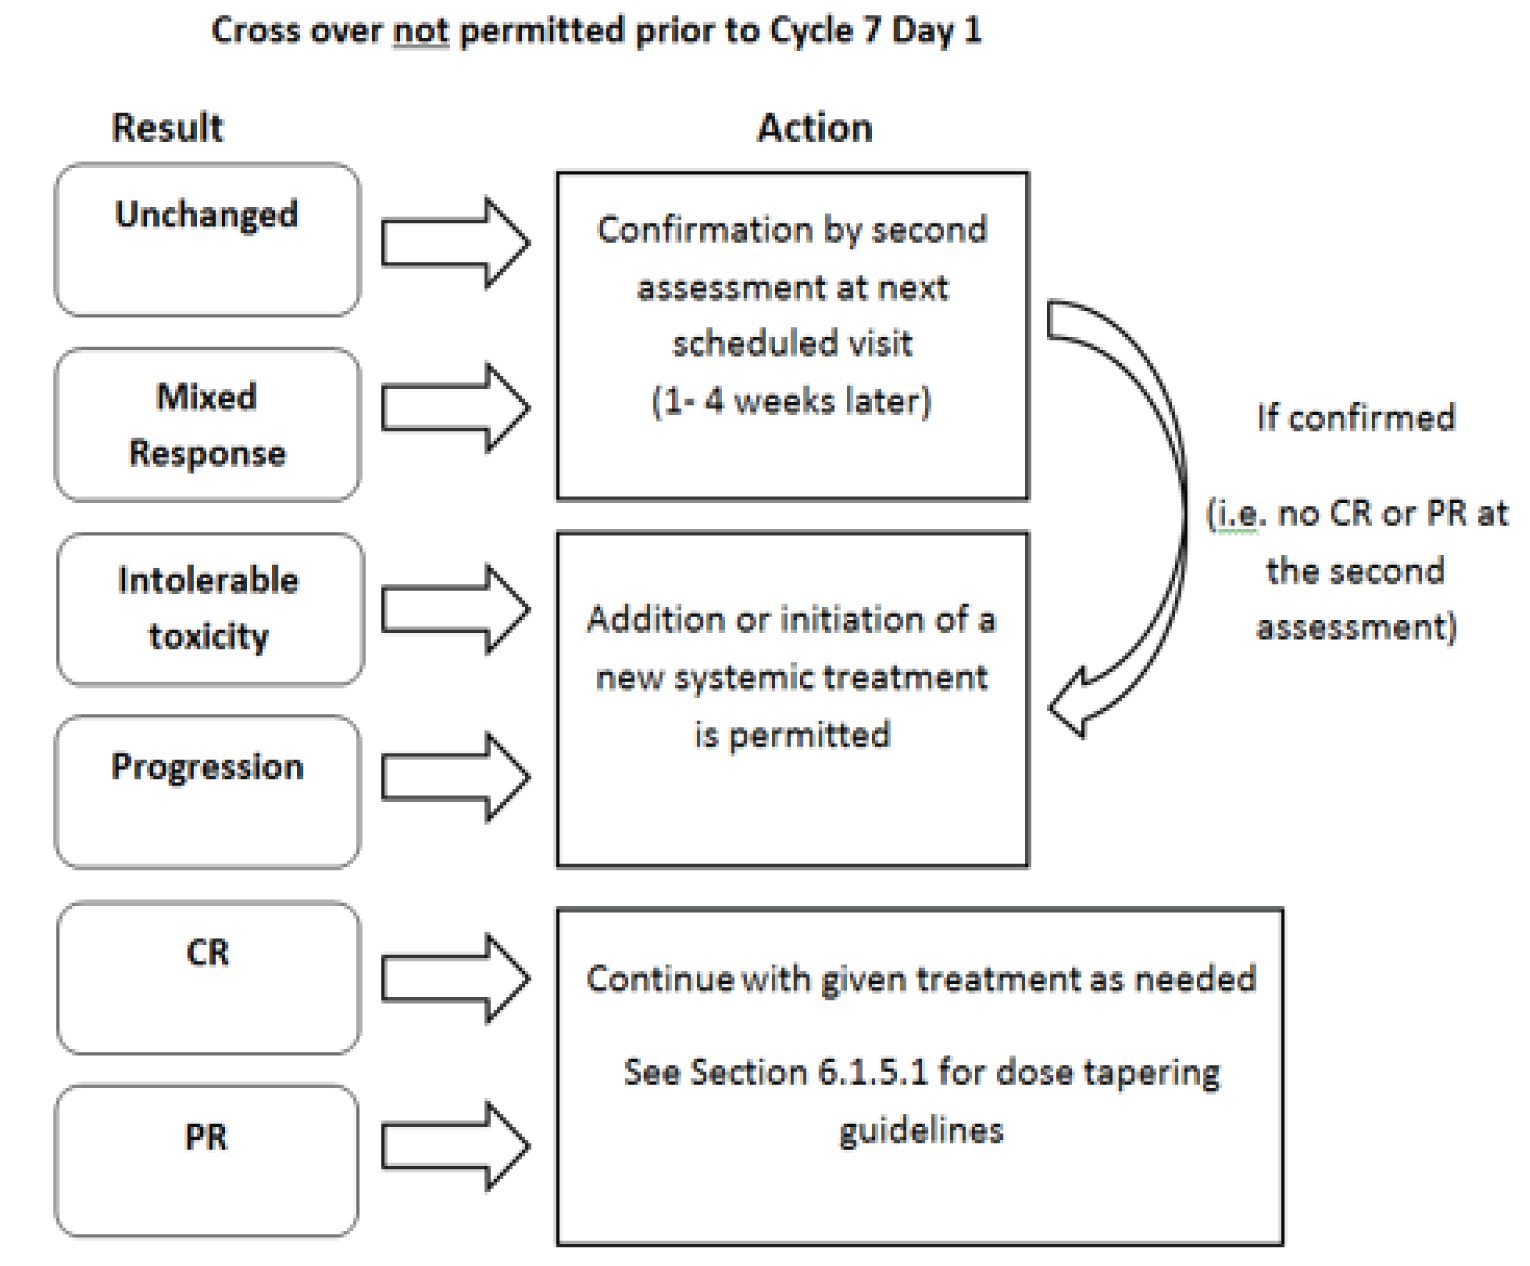 This figure shows that response assessments were performed on cycle 7 day 1, after completion of 6 cycles of treatment. In the ruxolitinib group, a change of systemic immunosuppressive therapy was allowed after documented disease progression or intolerable toxicity; it was considered a treatment failure. Changing a systemic therapy resulted in a ruxolitinib discontinuation. In the BAT group, addition or initiation of a new systemic therapy was allowed after documented disease progression, lack of response, intolerable toxicity, or a cGvHD flare; it was considered a treatment failure, and patients were counted as nonresponders in the primary analysis.